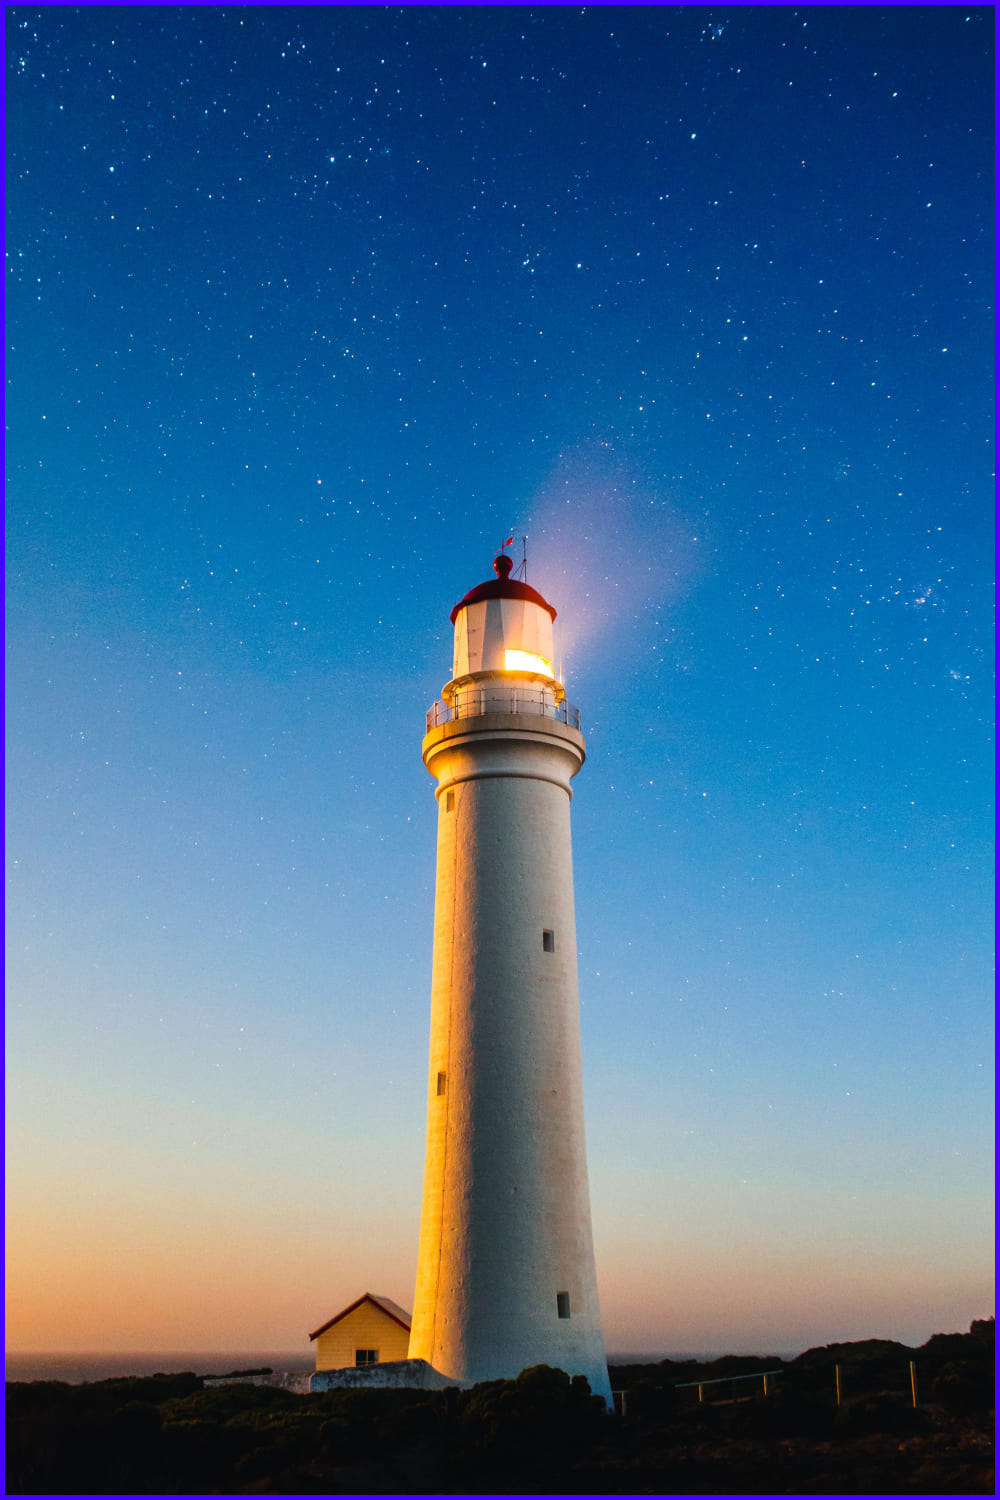 View of the lighthouse against the sunset sky.